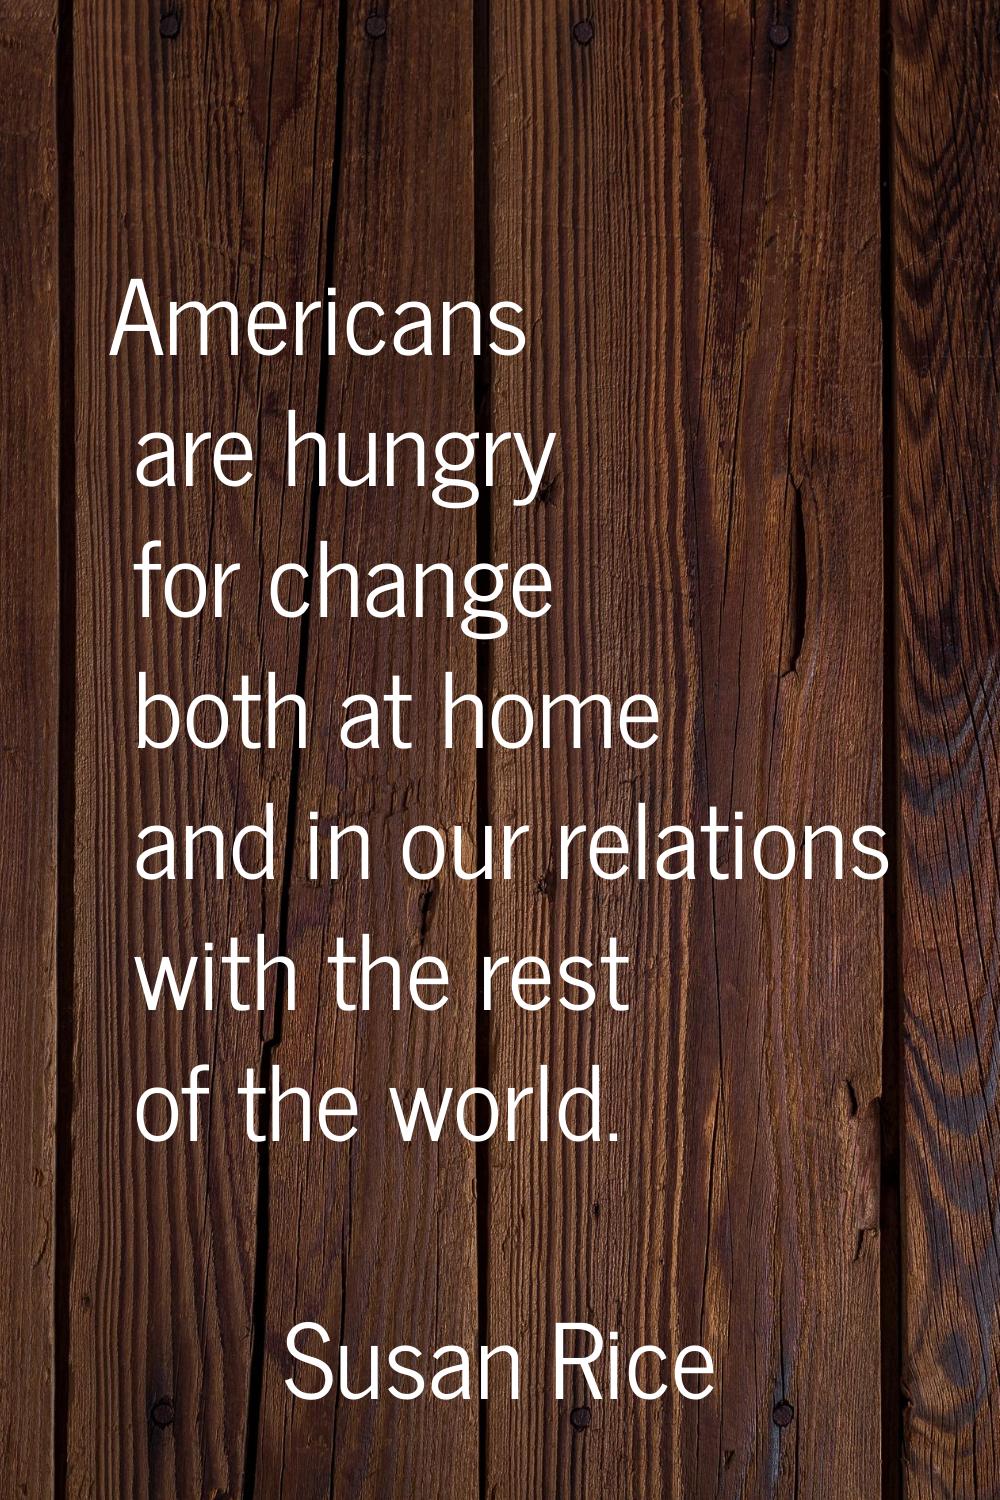 Americans are hungry for change both at home and in our relations with the rest of the world.